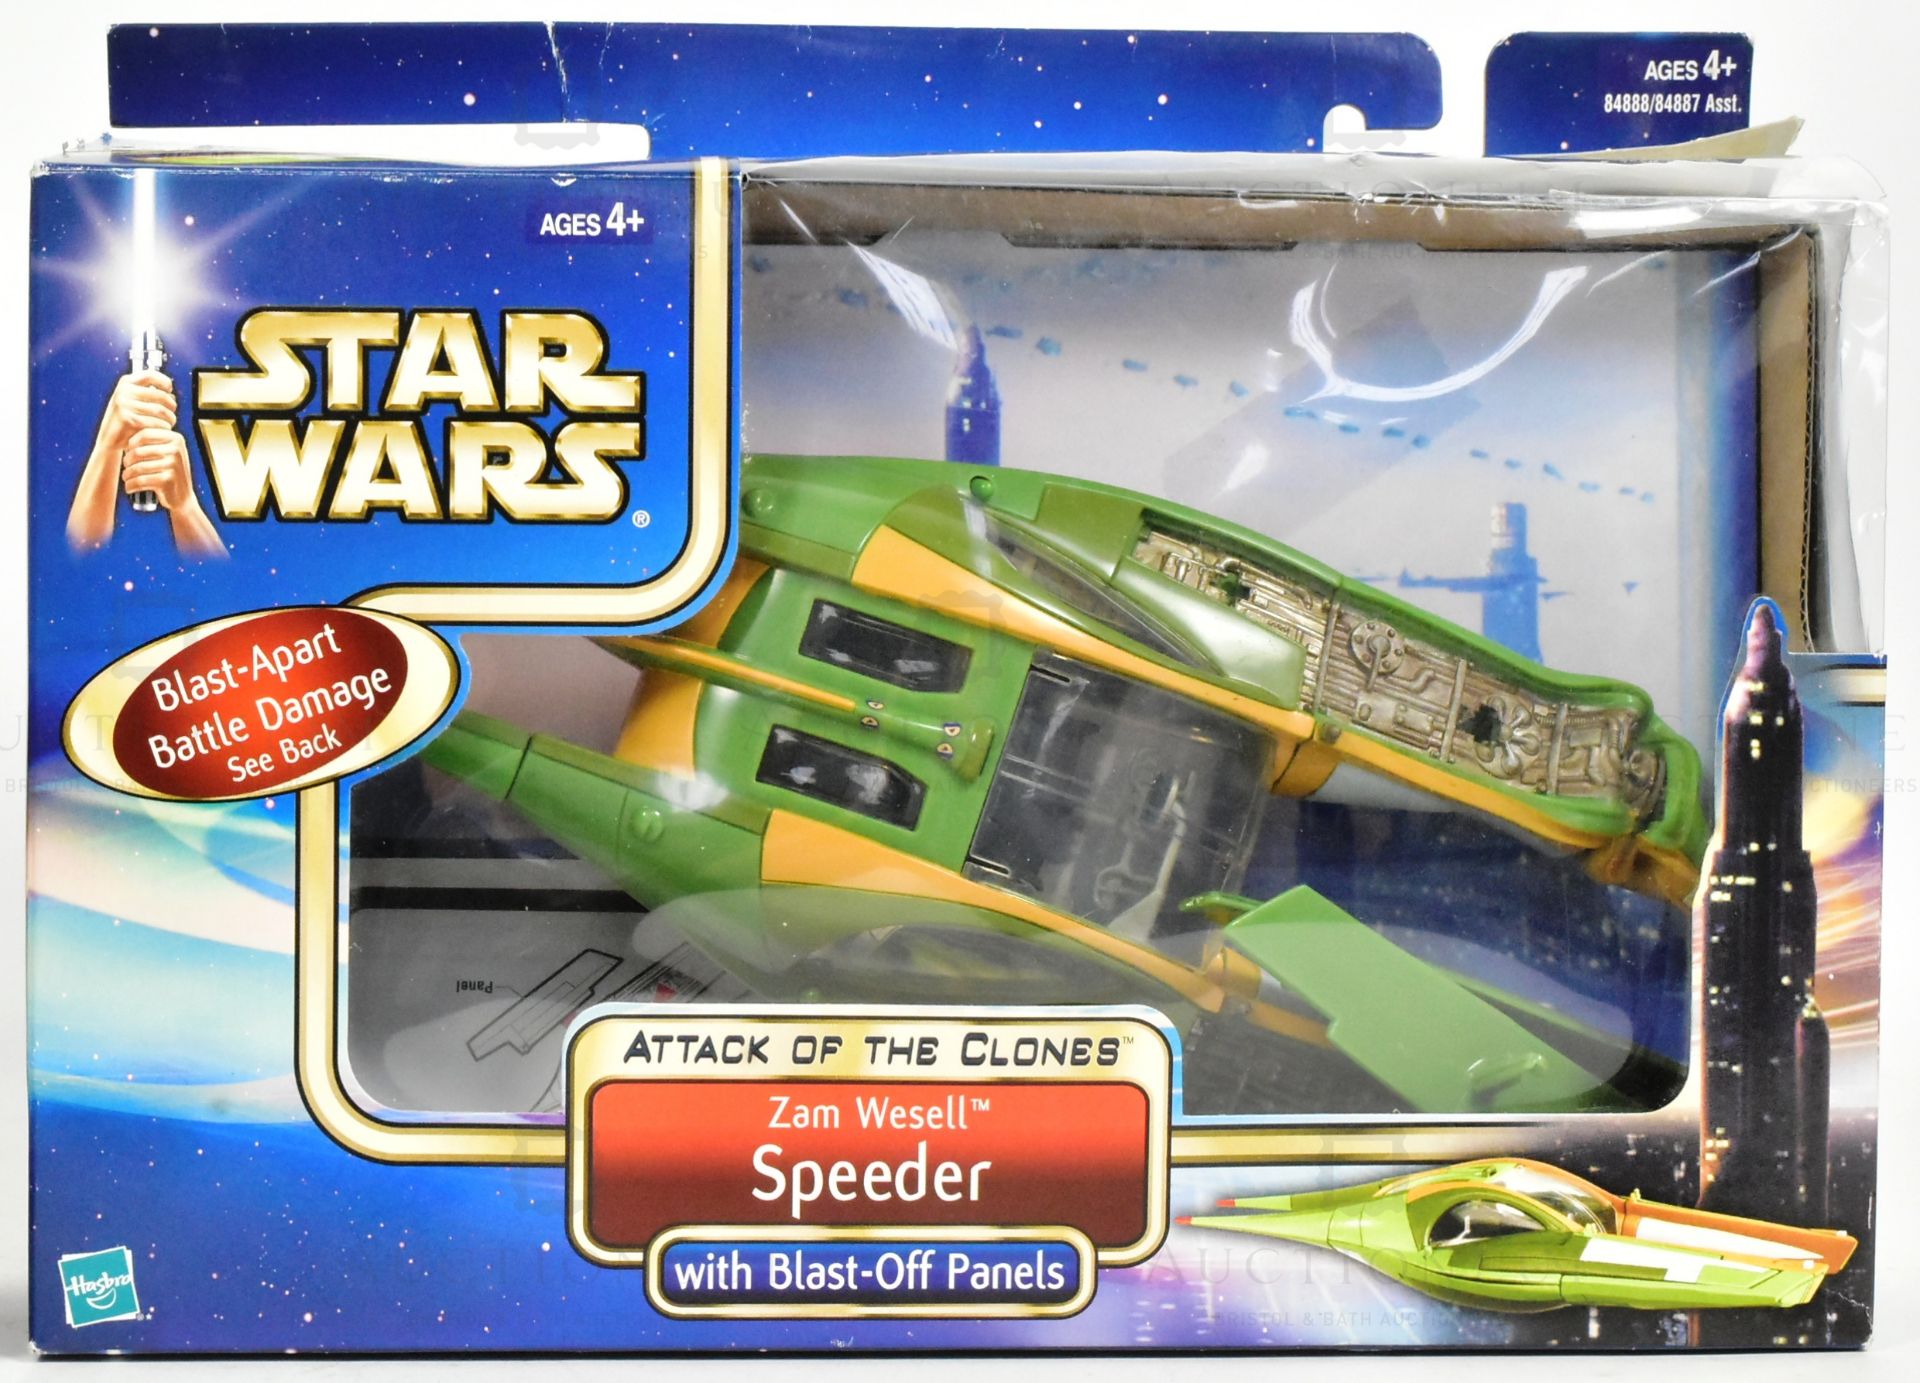 STAR WARS - ATTACK OF THE CLONES - BOXED PLAYSETS - Image 3 of 4